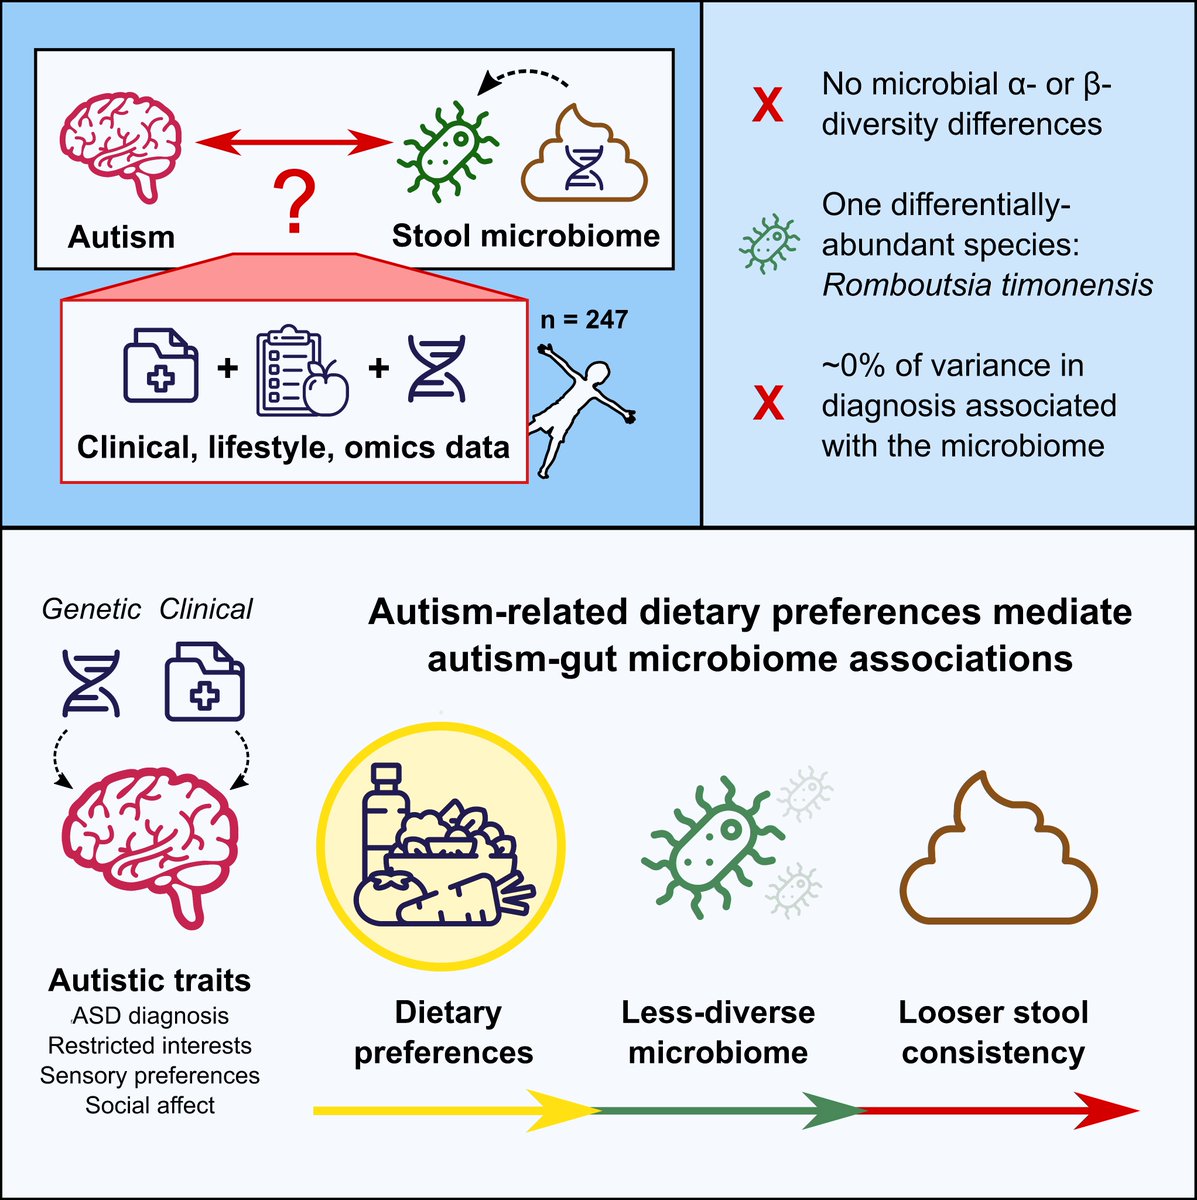 Our #autism #microbiome paper “Autism-related dietary preferences mediate autism-microbiome associations” is out in @CellCellPress today! authors.elsevier.com/c/1e3XWL7PXf05V Thread below (1/n) 👇: